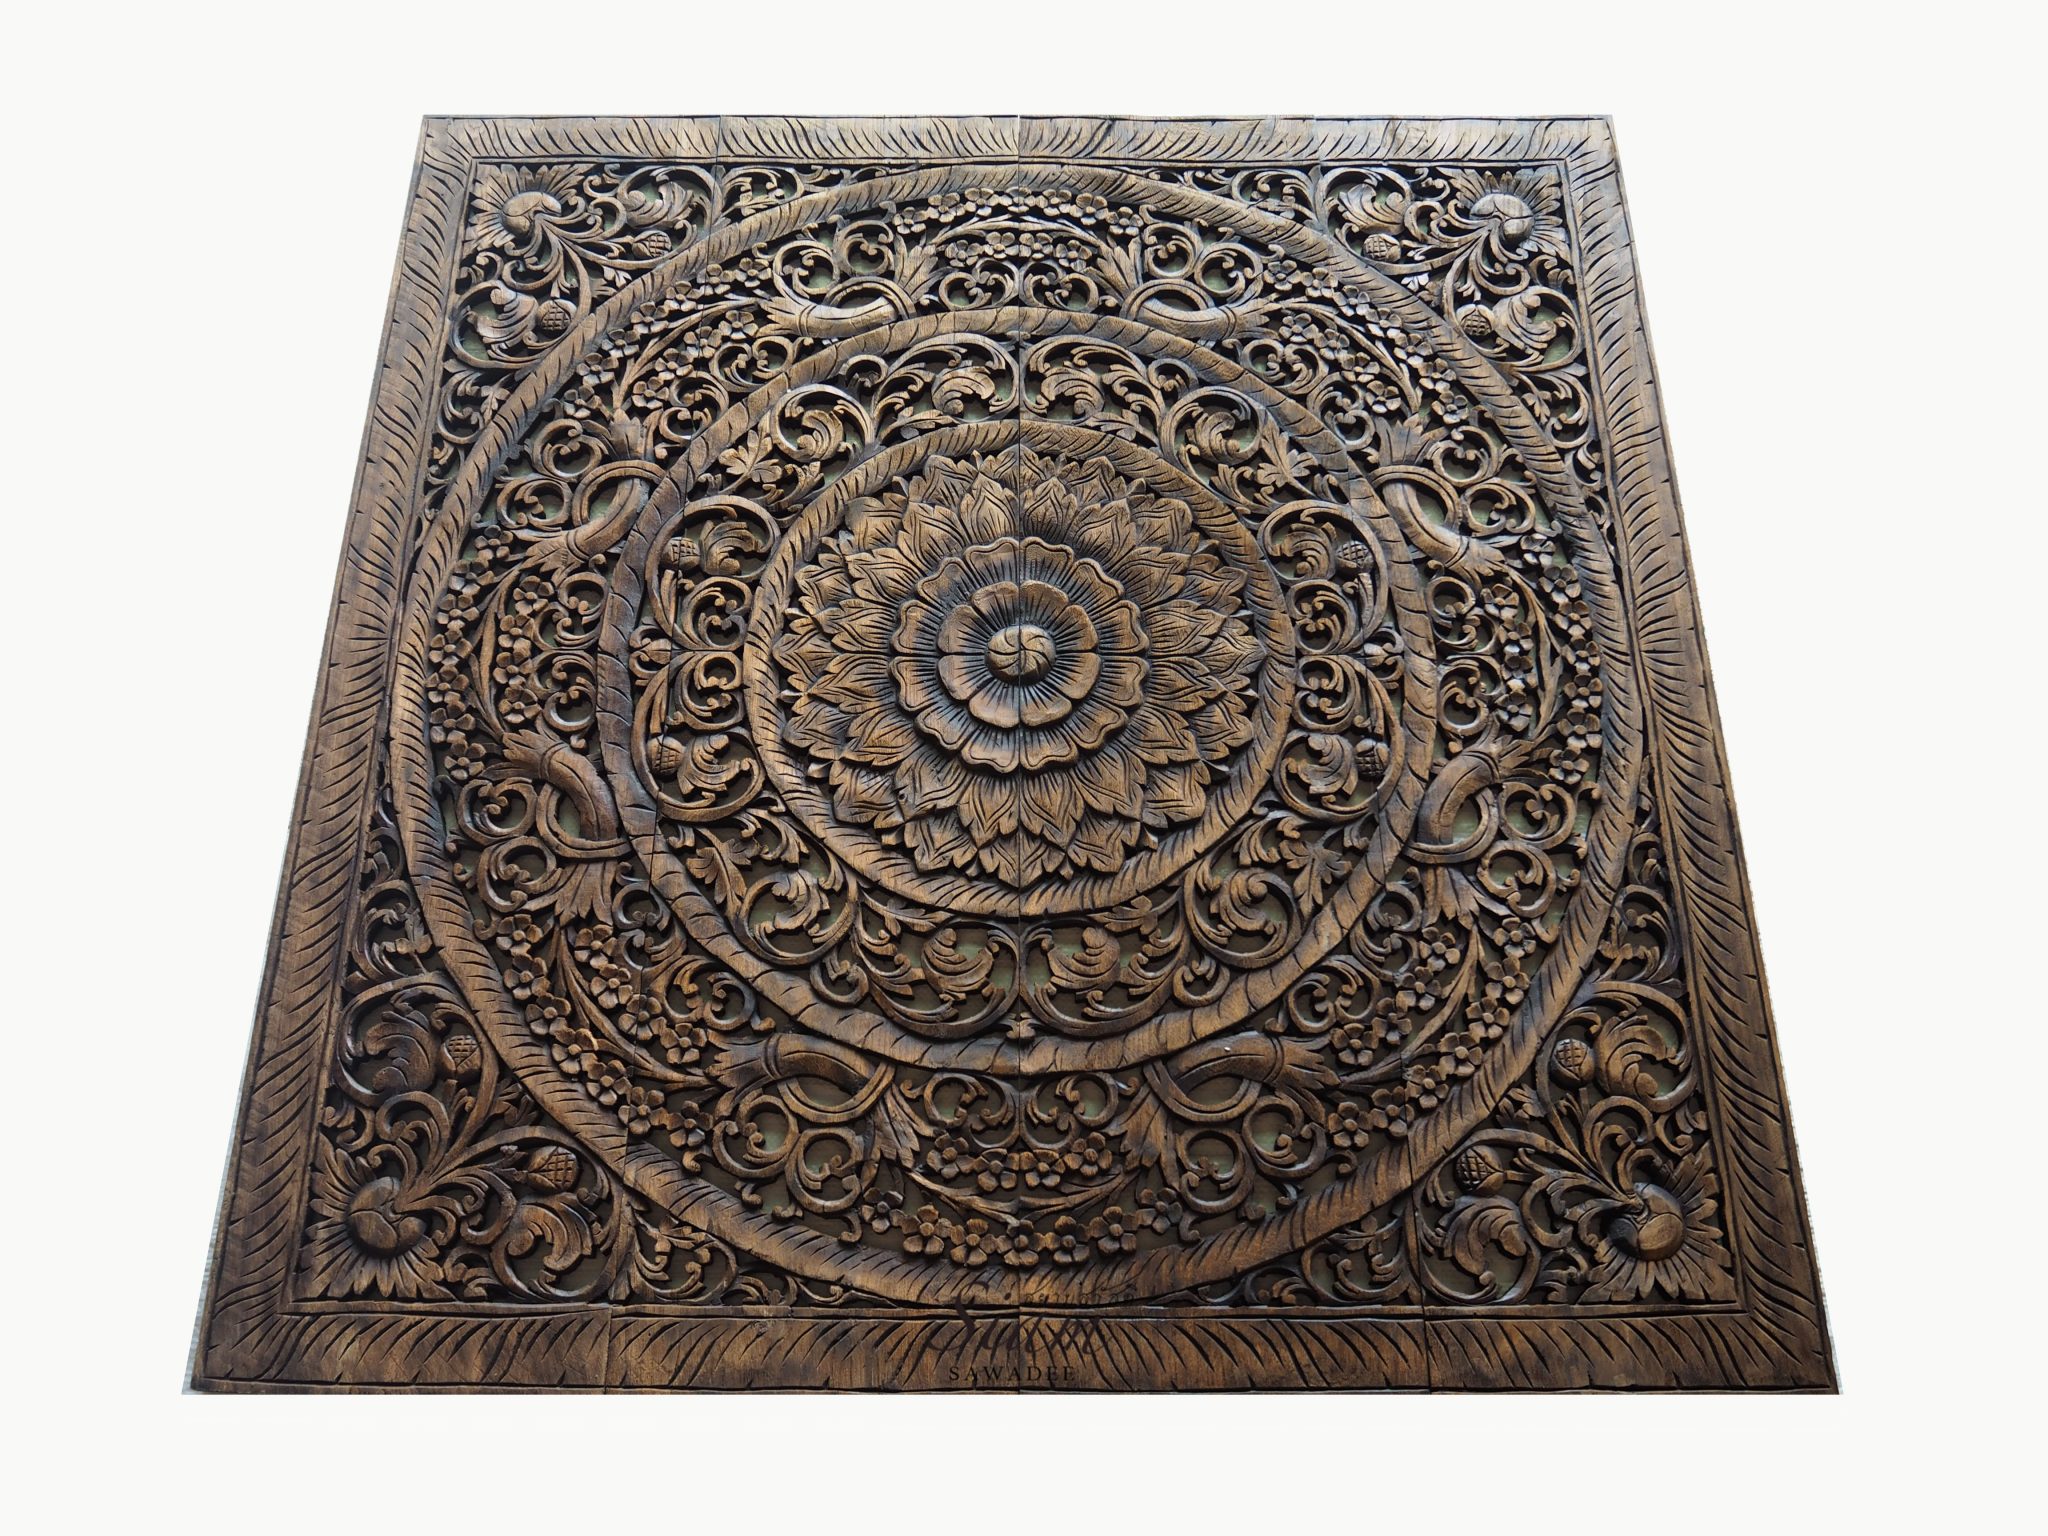 wooden decorative wall plaques photo - 6